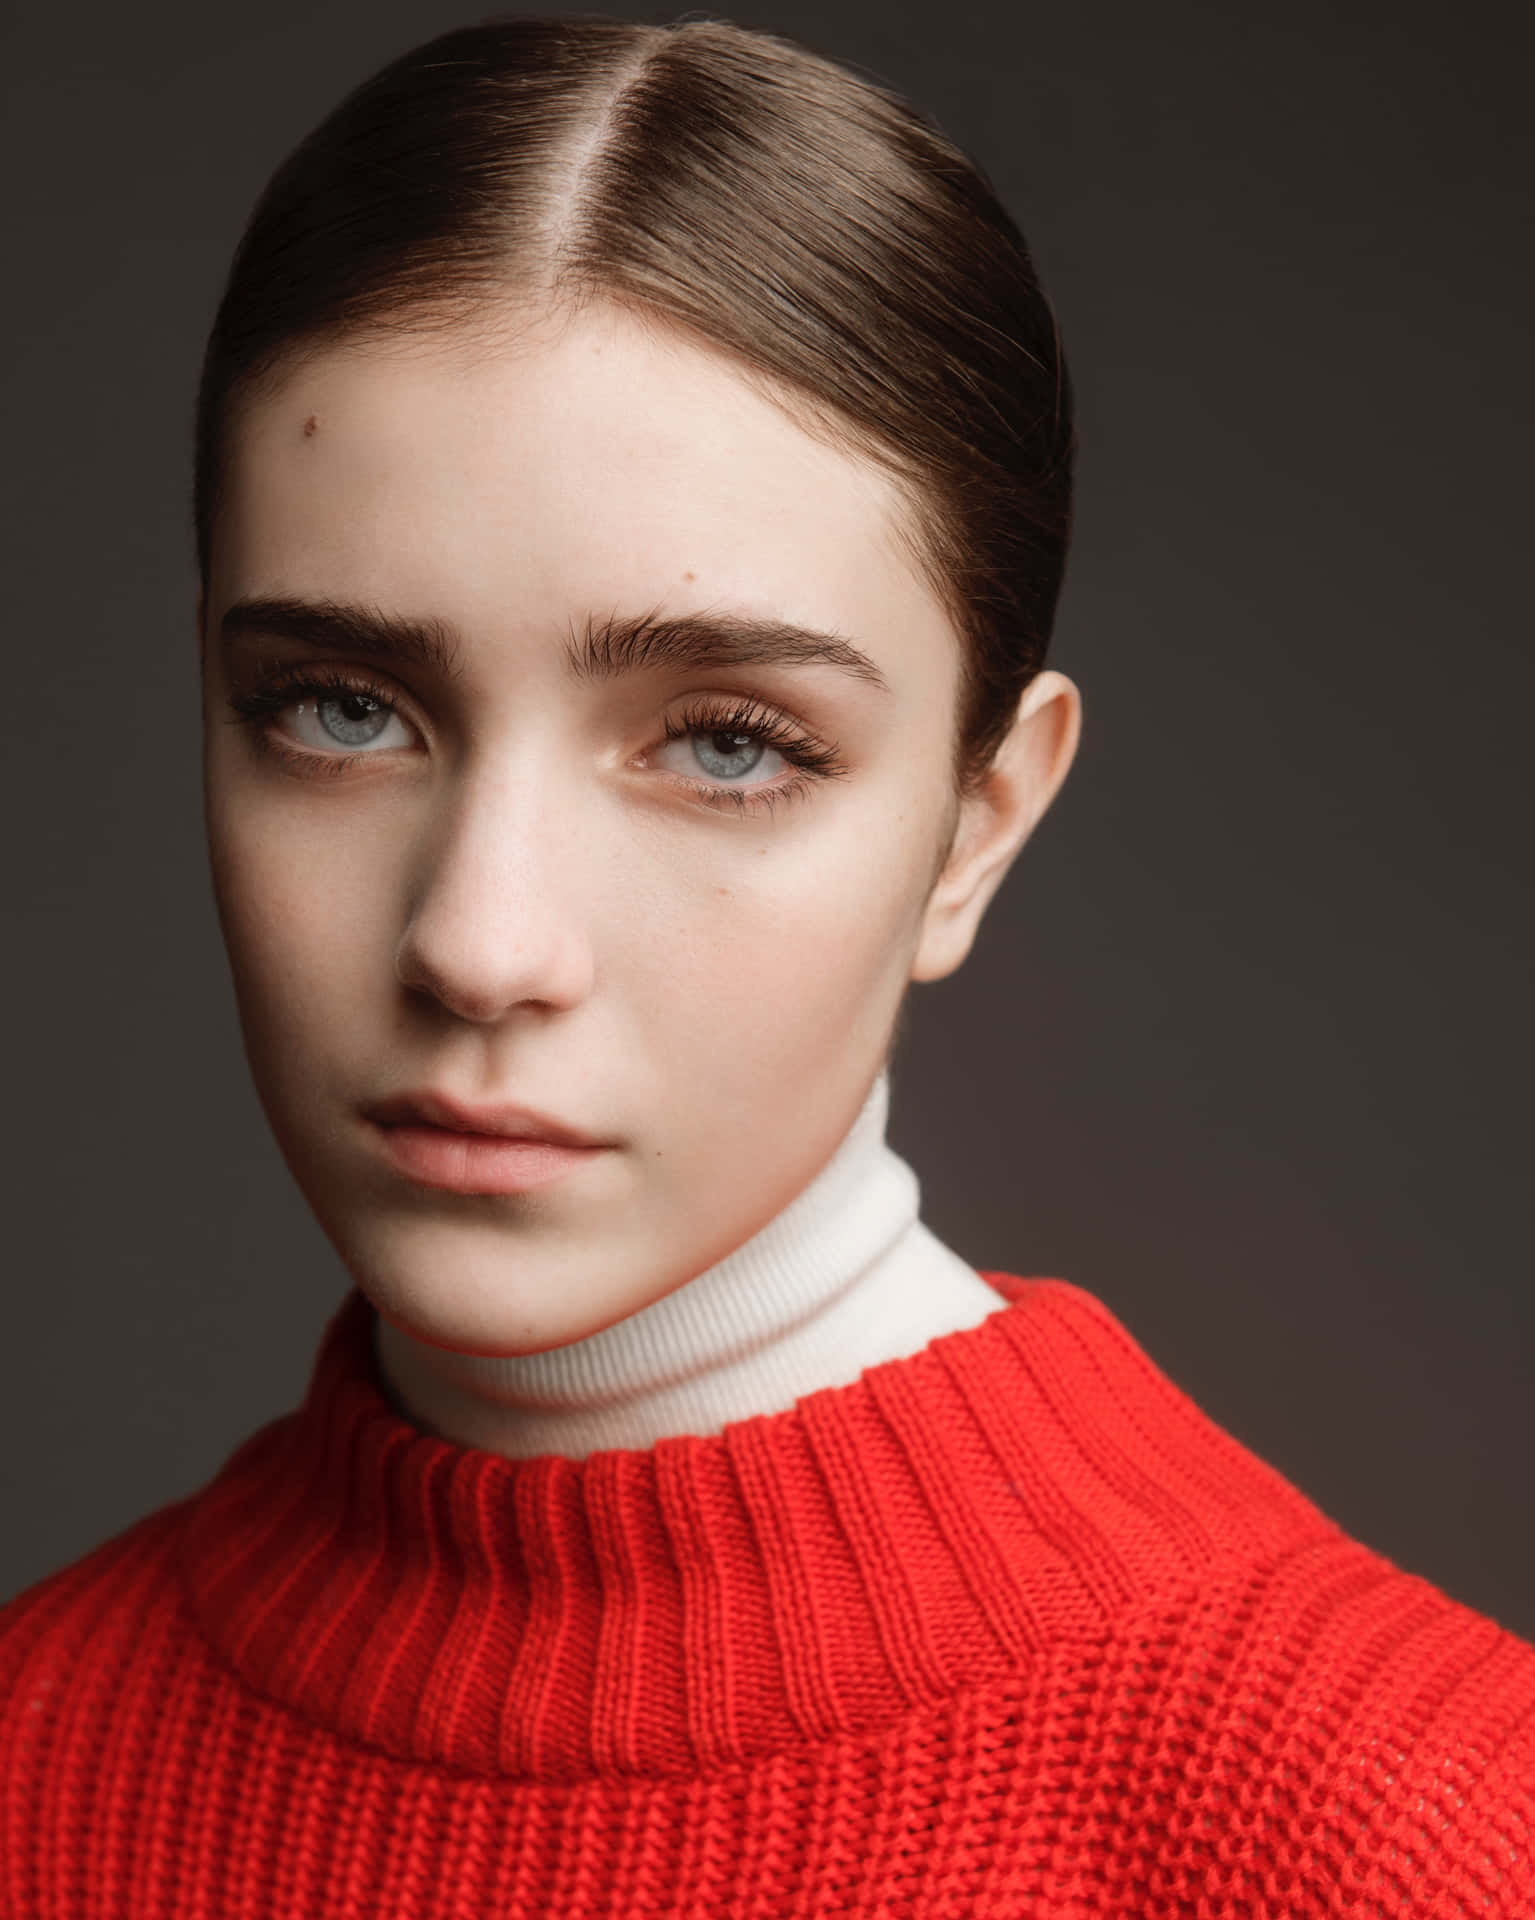 Serious Expression Portrait Red Sweater Wallpaper